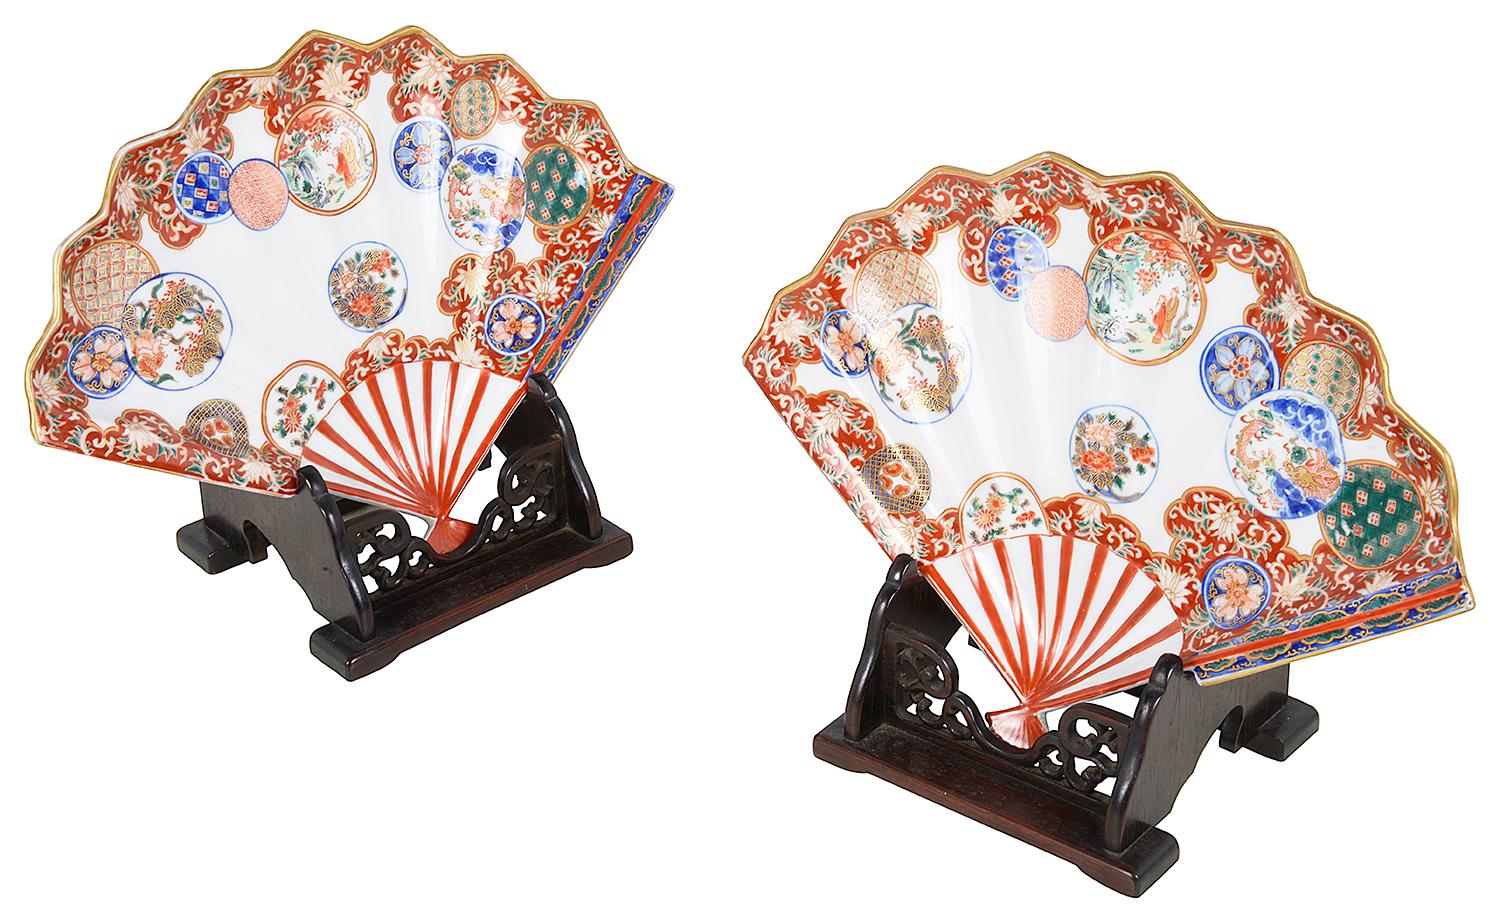 A wonderful fine quality pair of late 19th- early twentieth century, Meiji period Japanese Imari Fan shaped dished, each with classical motif, scrolling foliate hand painted decoration with inset panels depicting various mythical dragons, people in